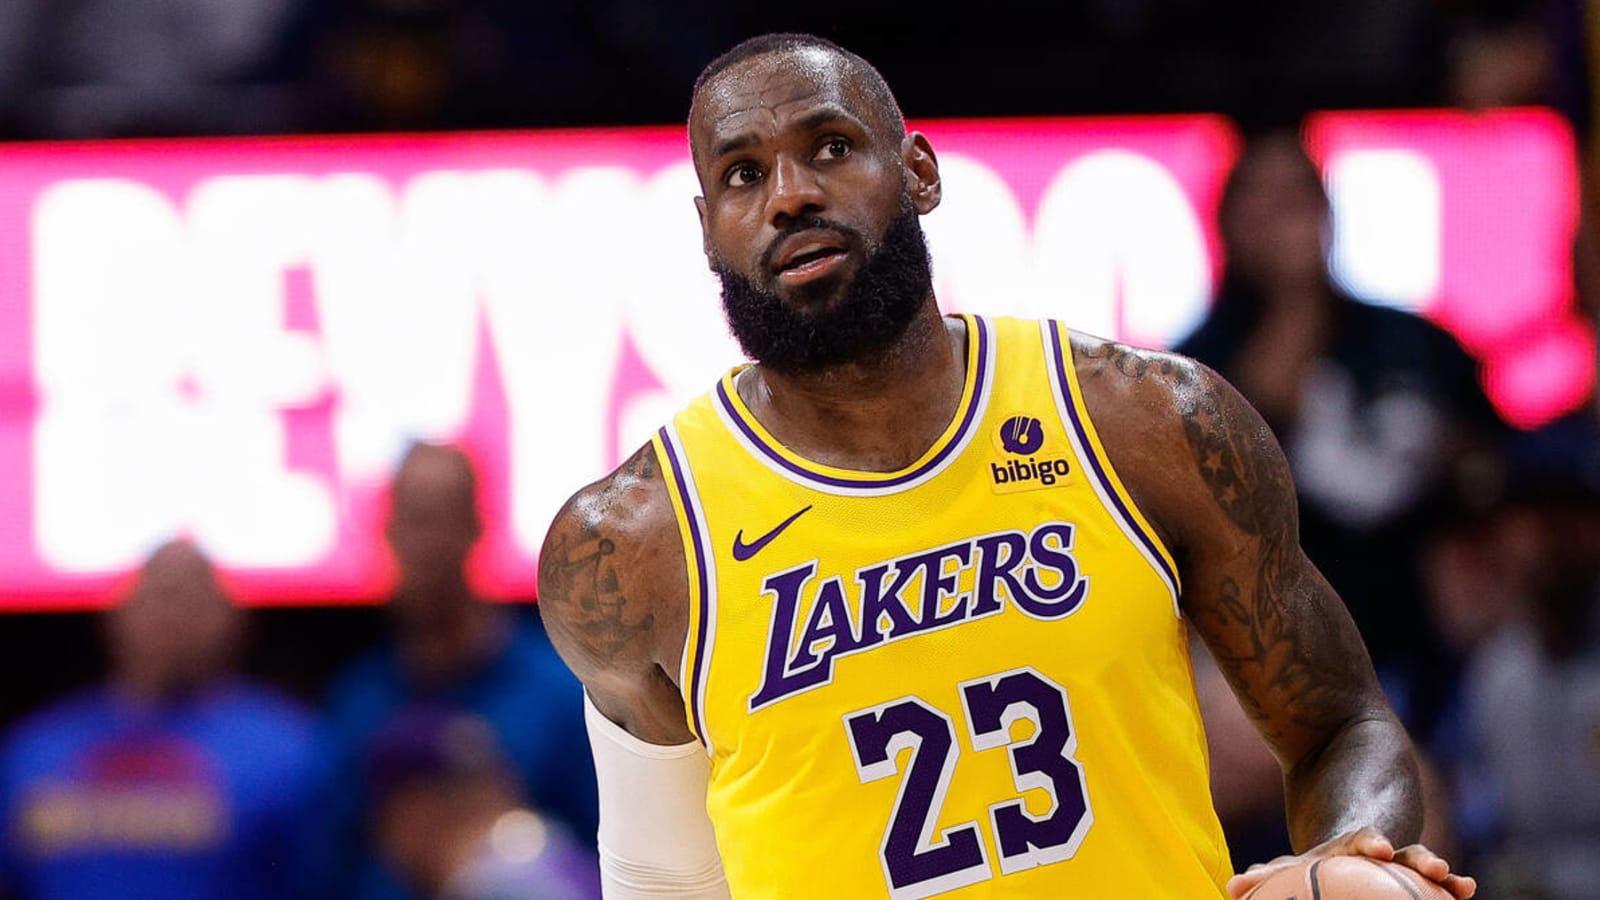 Report: LeBron James Not Involved In Lakers Coaching Search; NBA Exec Thinks Rob Pelinka Could Blame LeBron If JJ Redick Hire Doesn’t Work Out